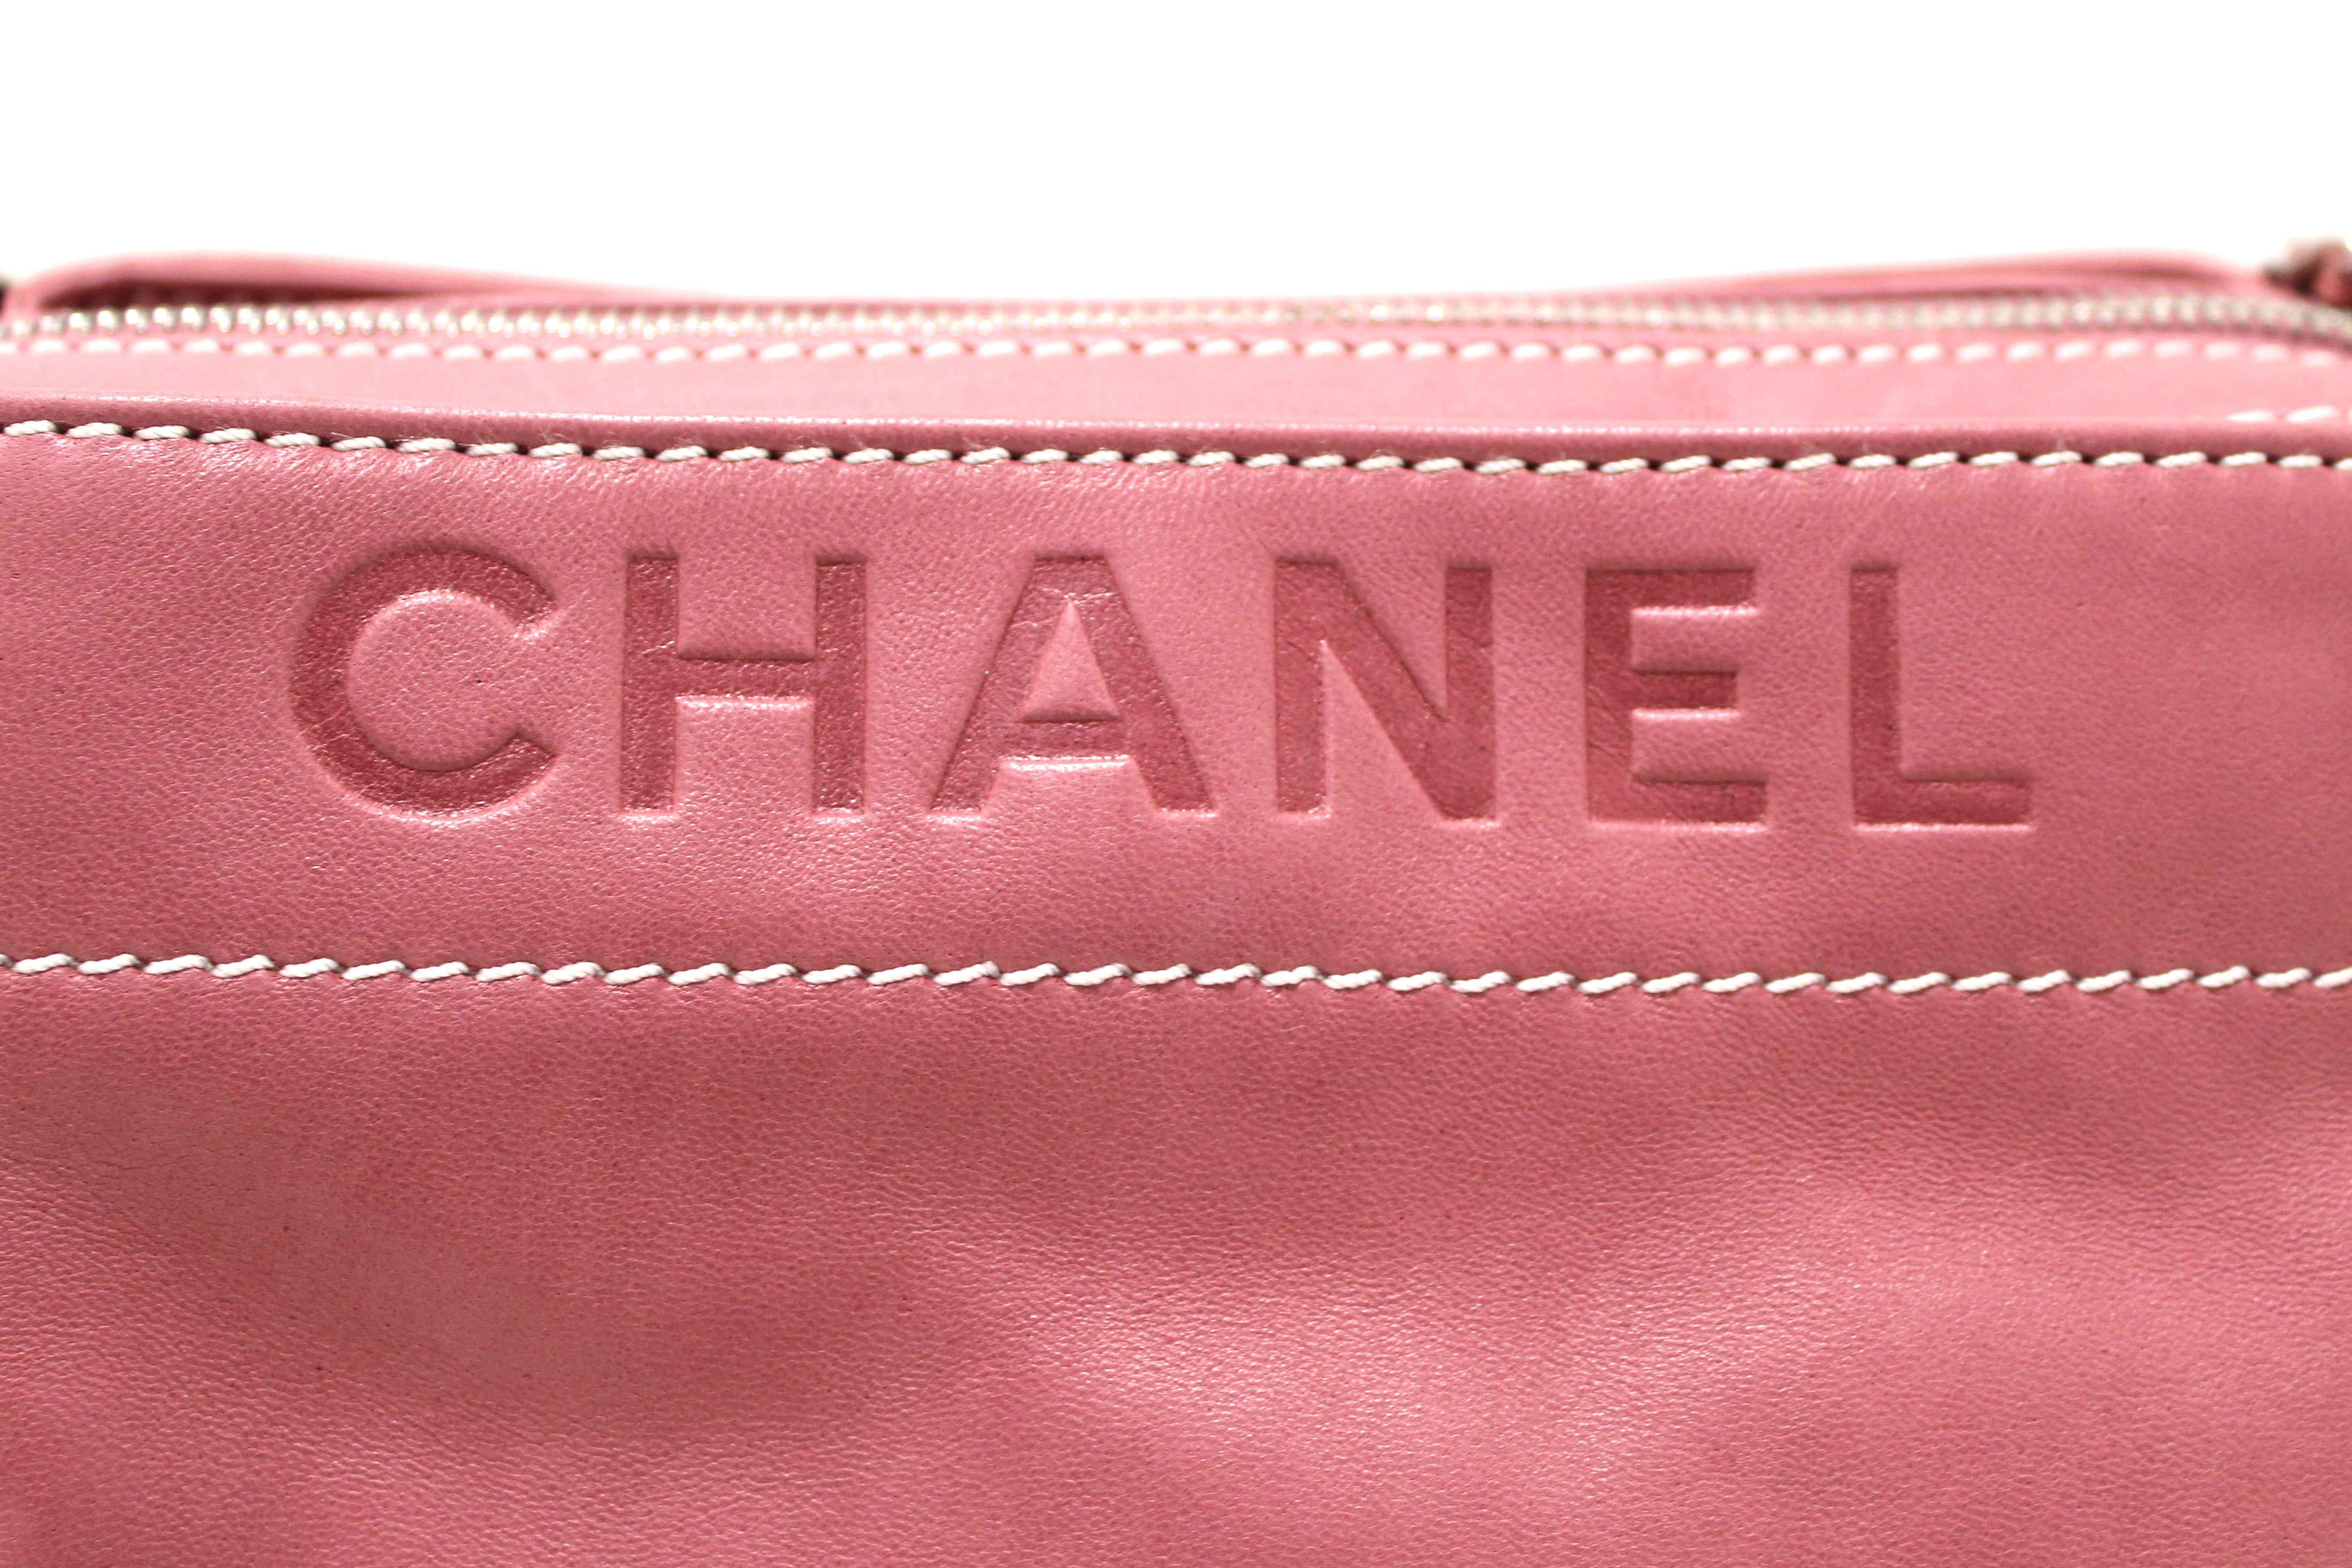 Authentic Chanel Pink Lambskin Leather Shoulder Bag